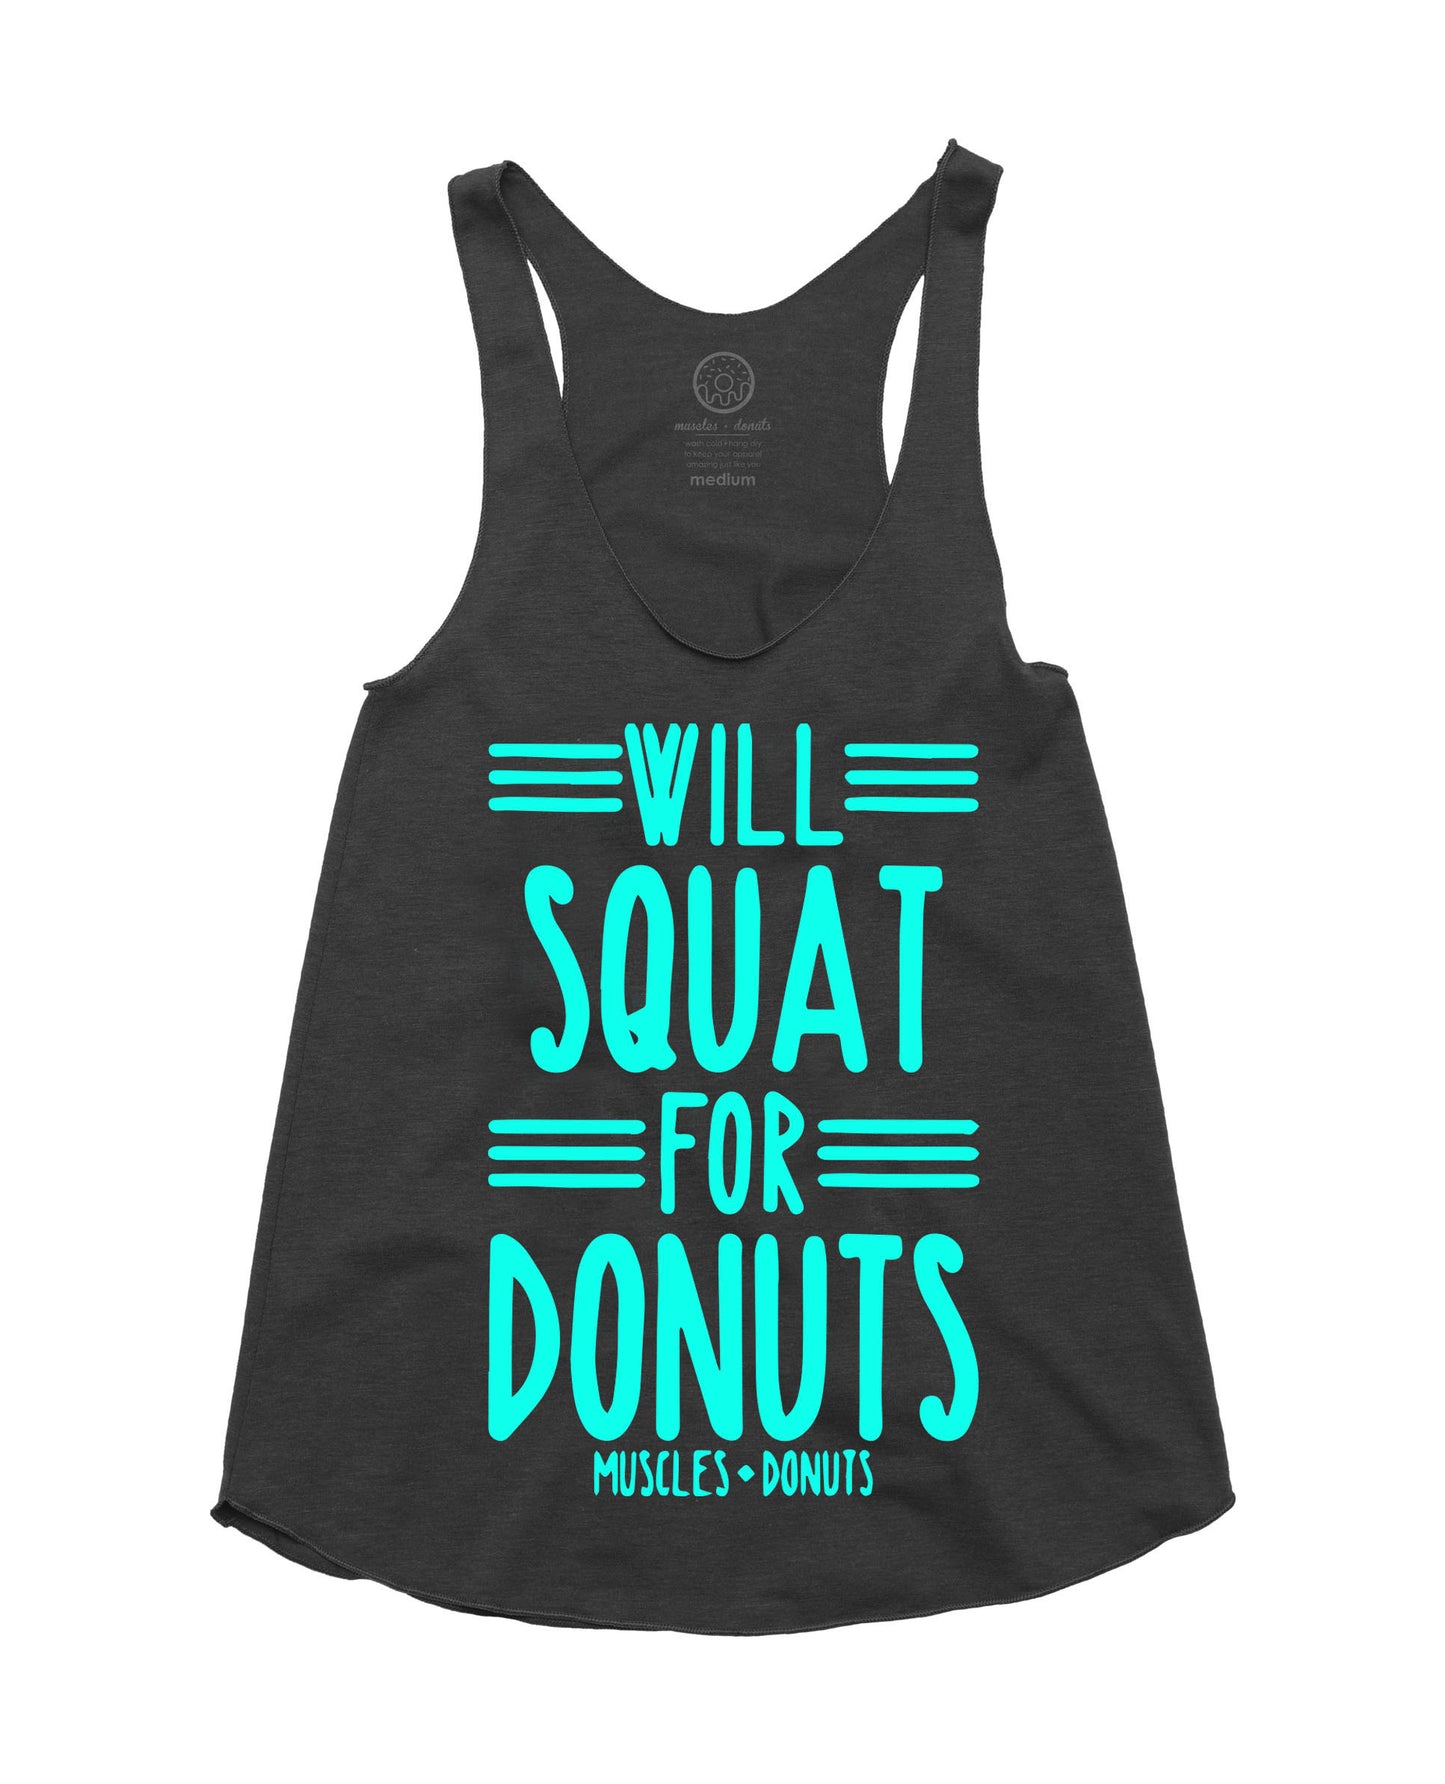 Will squat for donuts